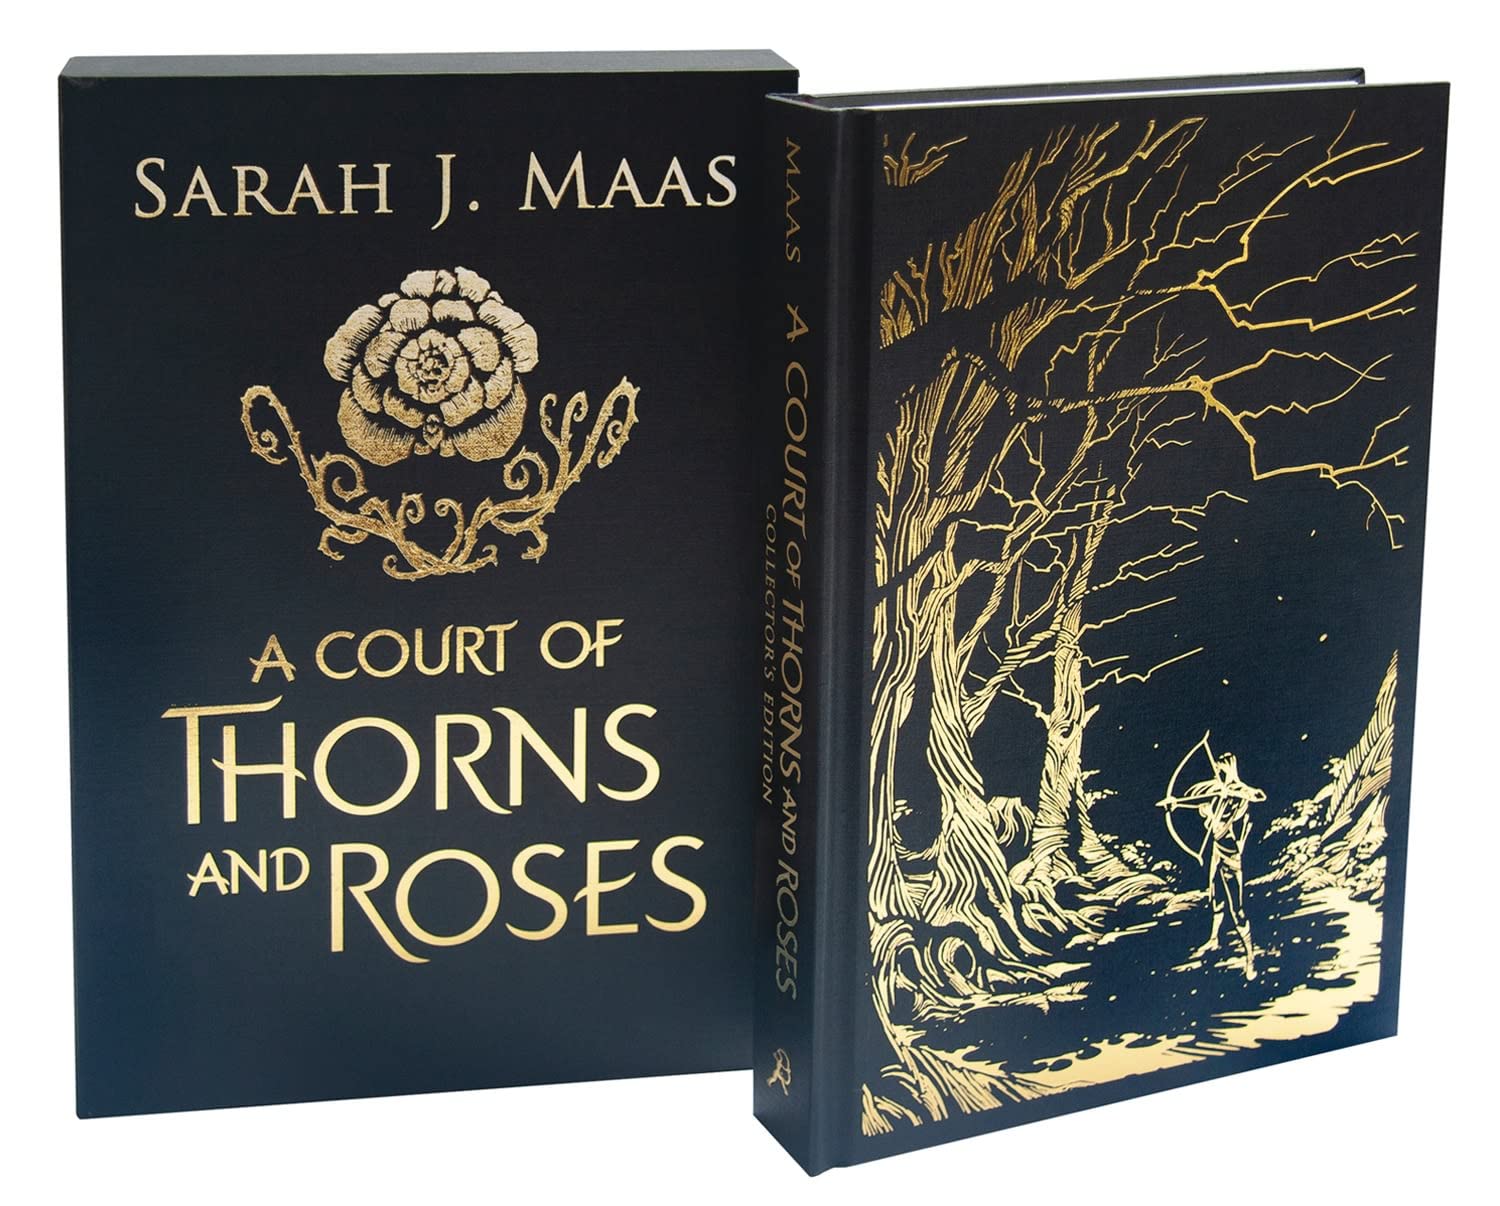 A Court of Thorns and Roses Collector's Edition by Maas, Sarah J.